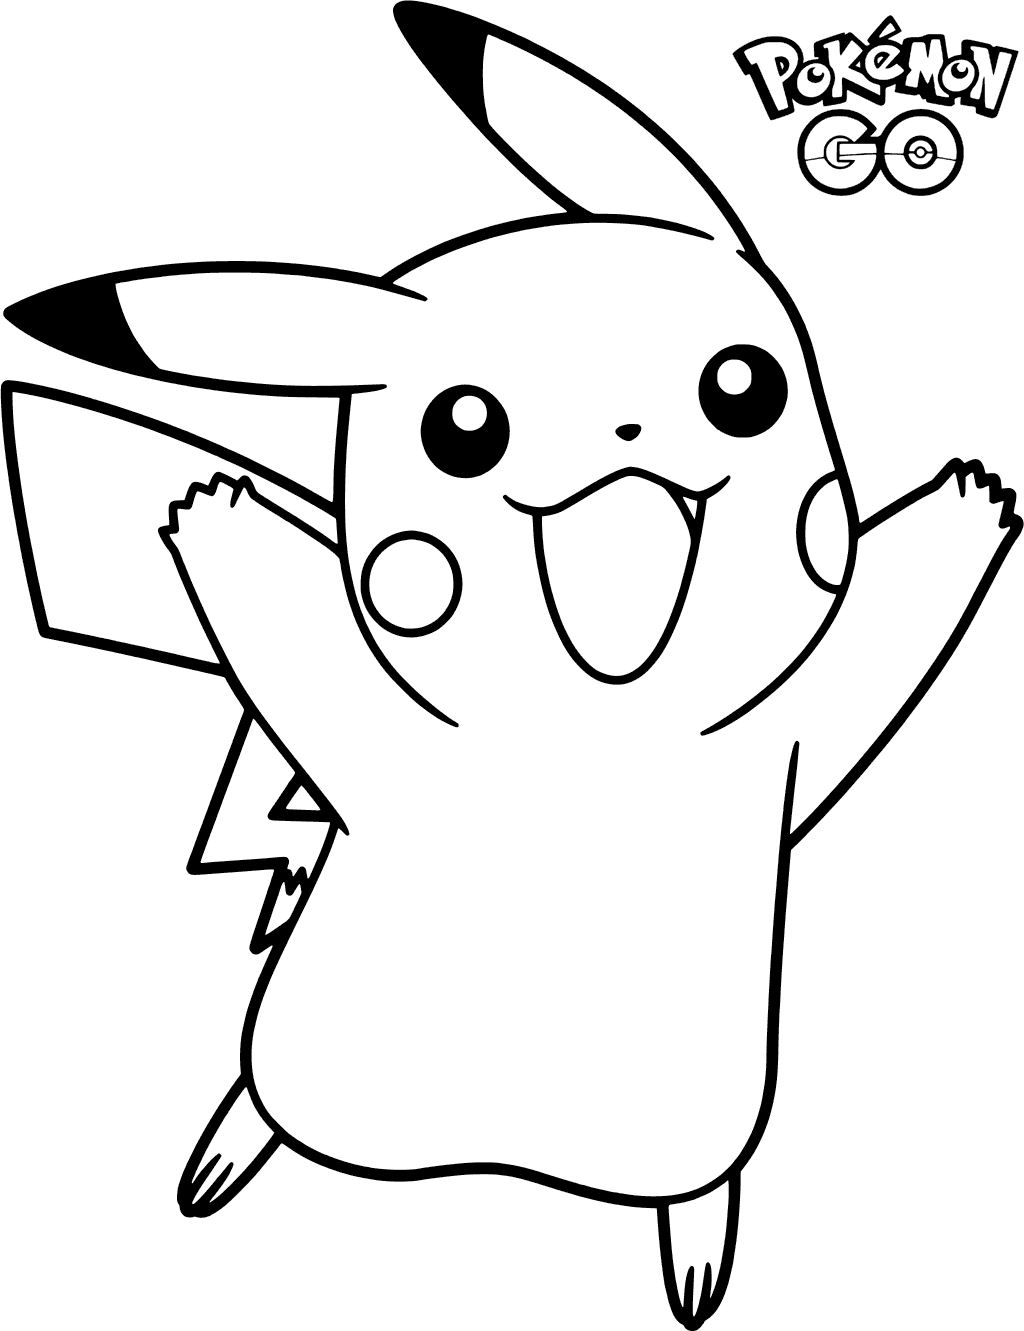 Pokemon Go Coloring Pages   Best Coloring Pages For Kids